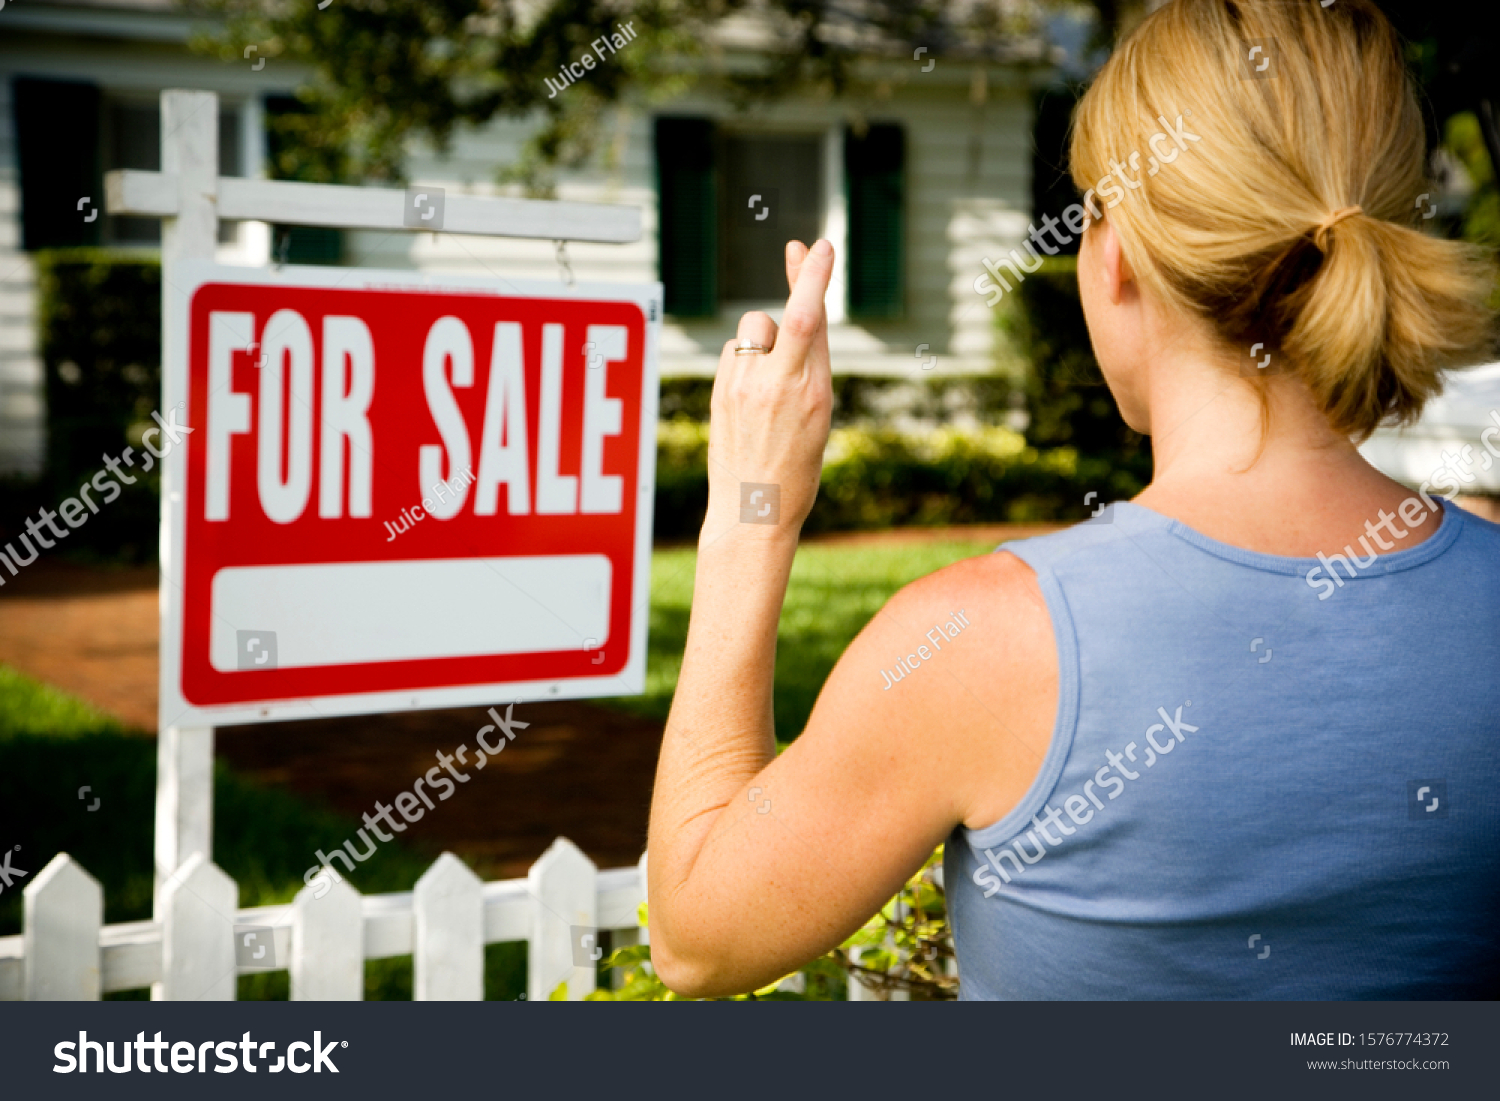 Woman standing by a for sale sign outside a family house, fingers crossed #1576774372